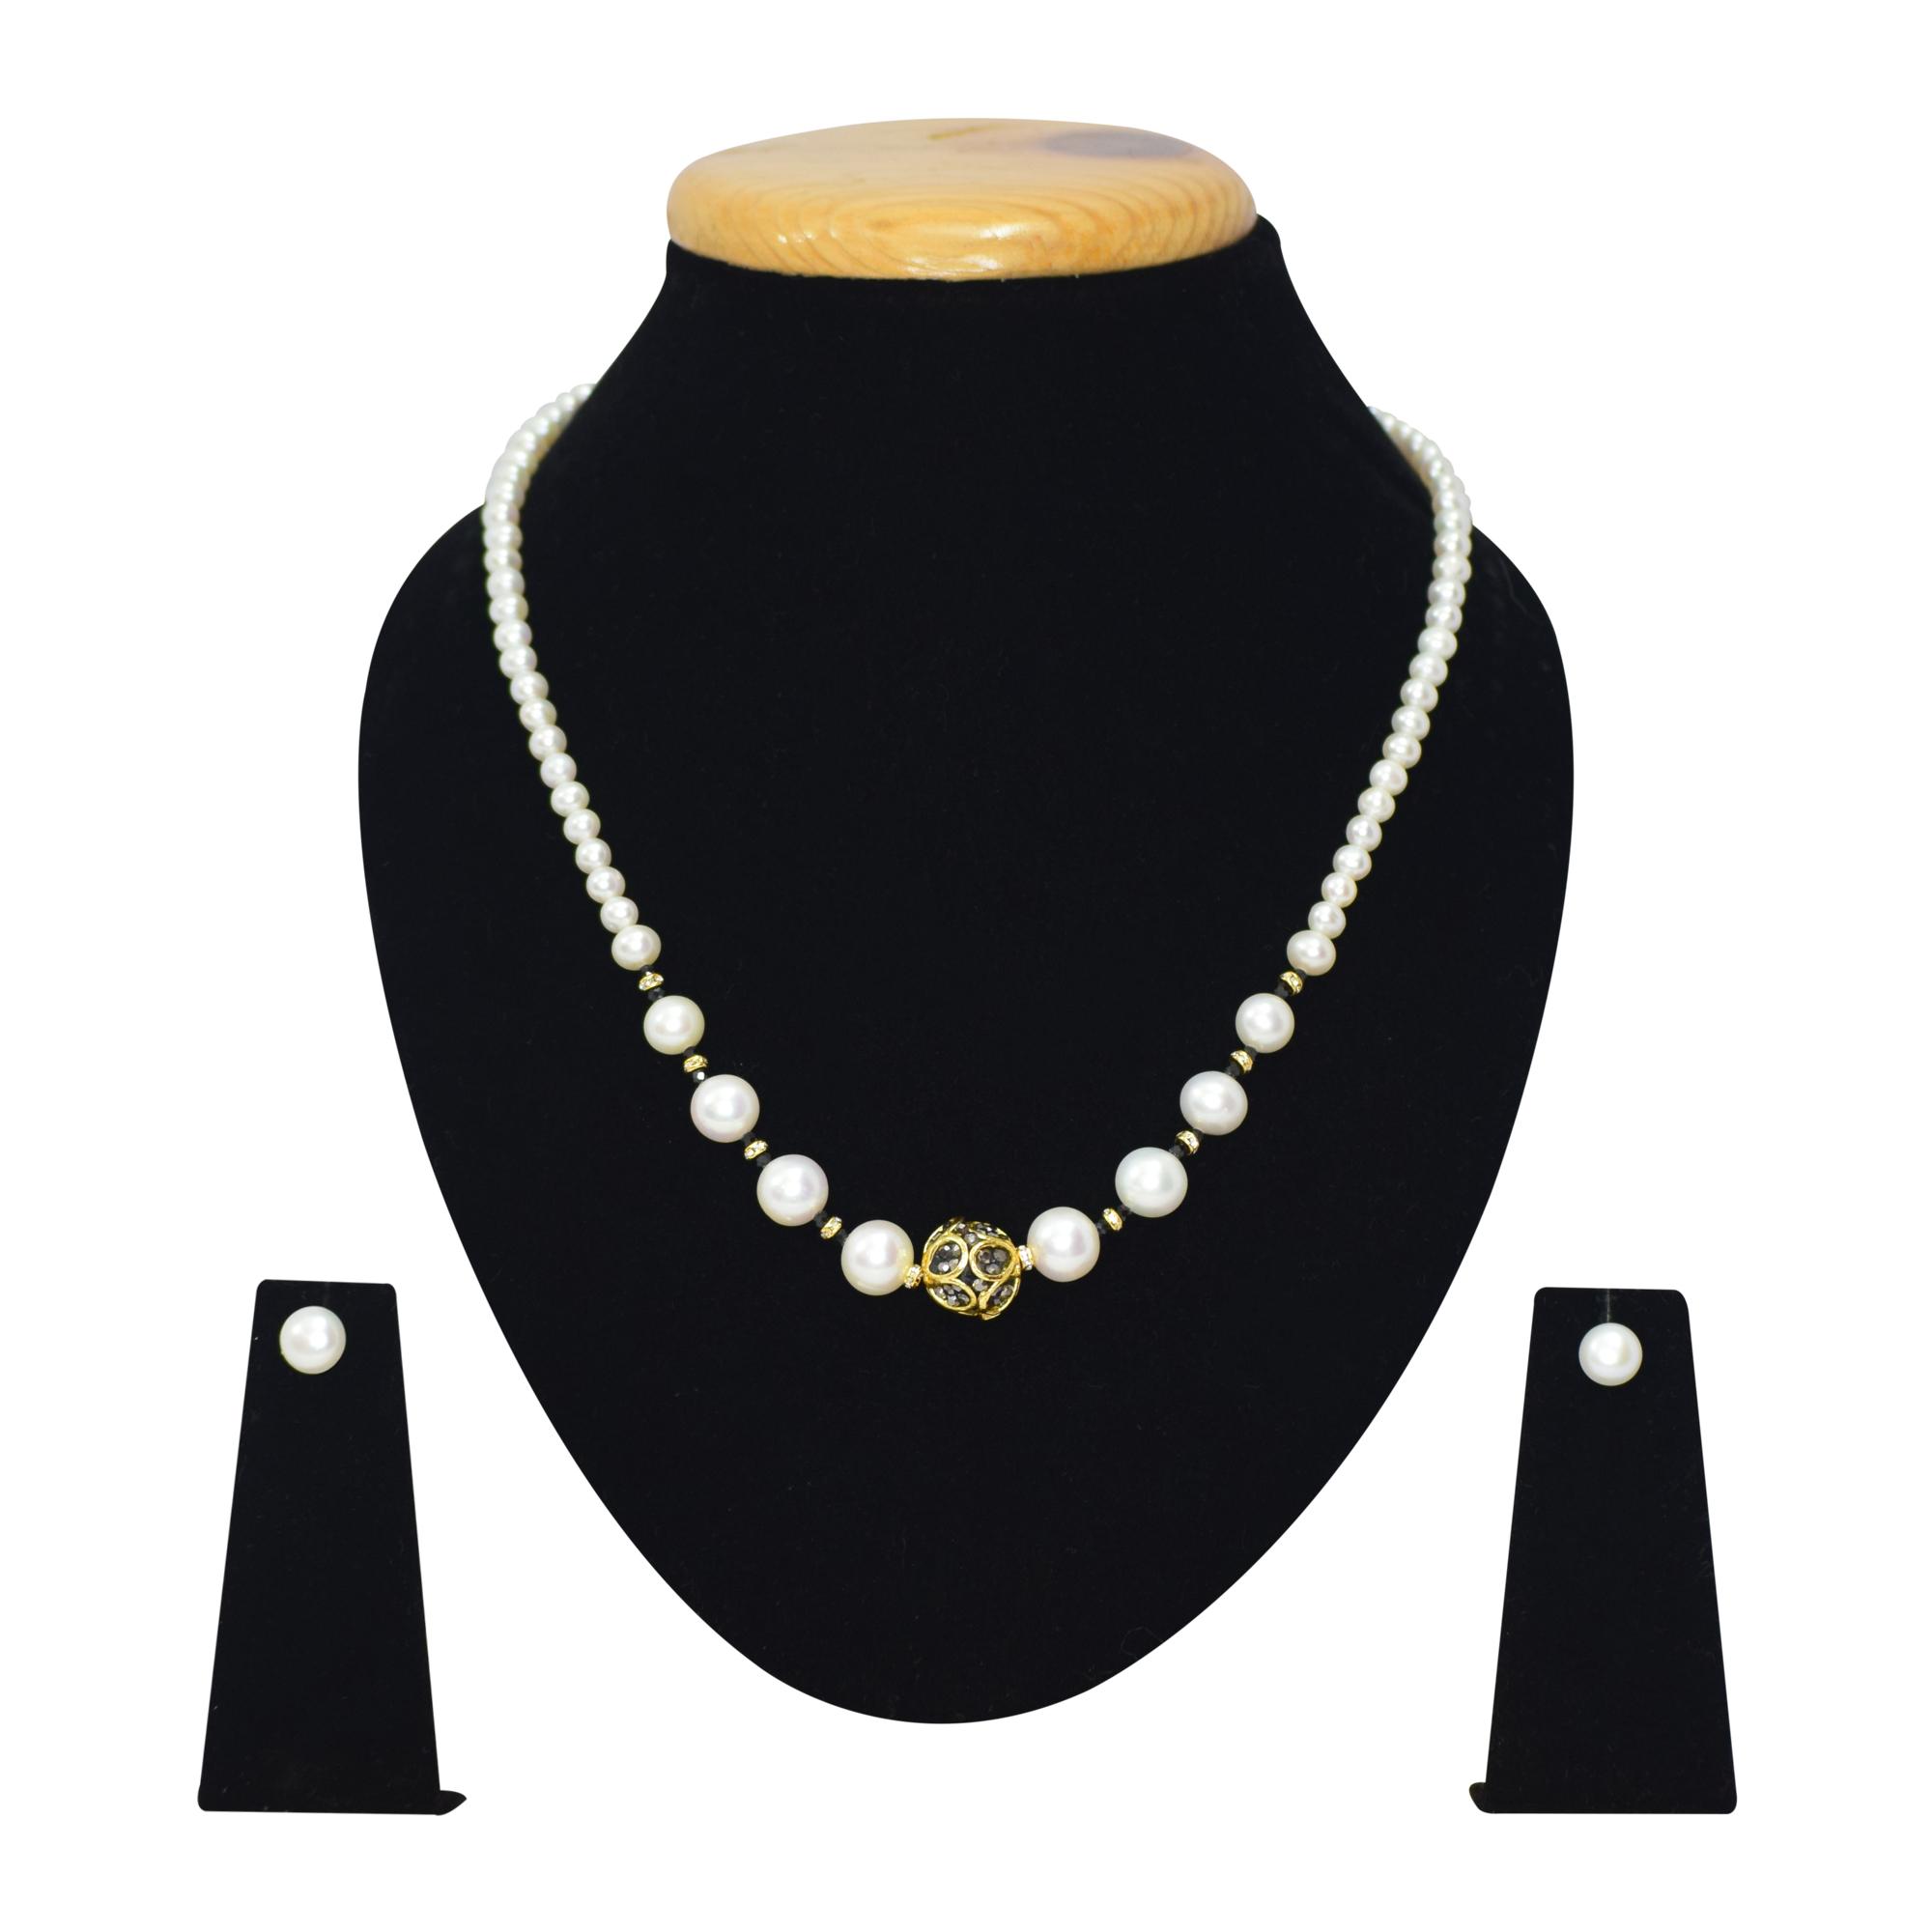 Black Onyx and Pearl Counter Bead Necklace- The Sattva Collection